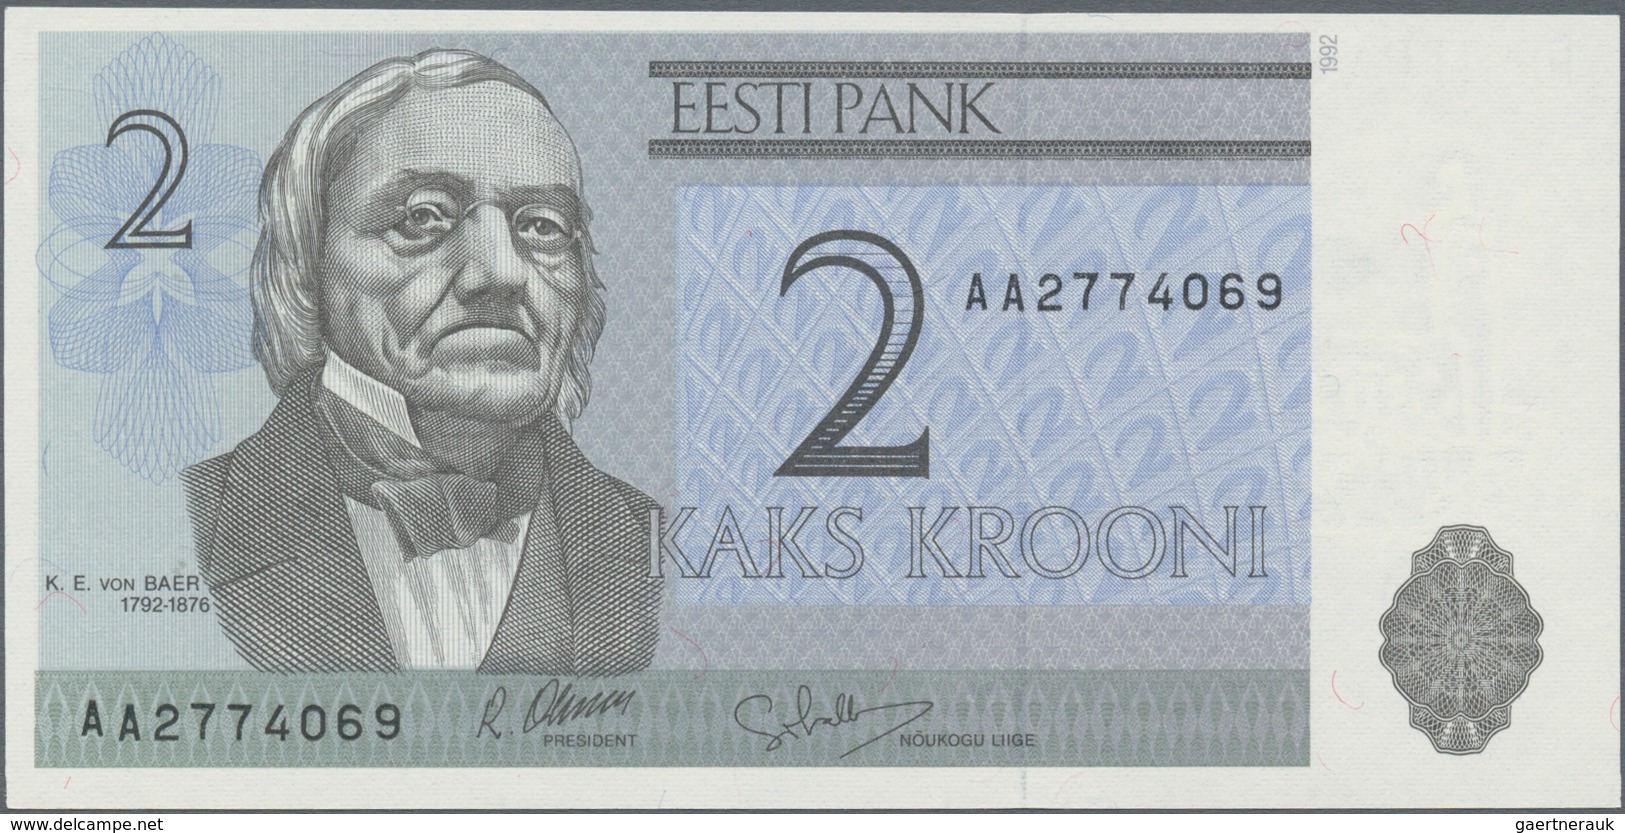 Estonia / Estland: Very nice set with 11 Banknotes series 1991 and 1992 with 5, 10, 25, 100 and 500